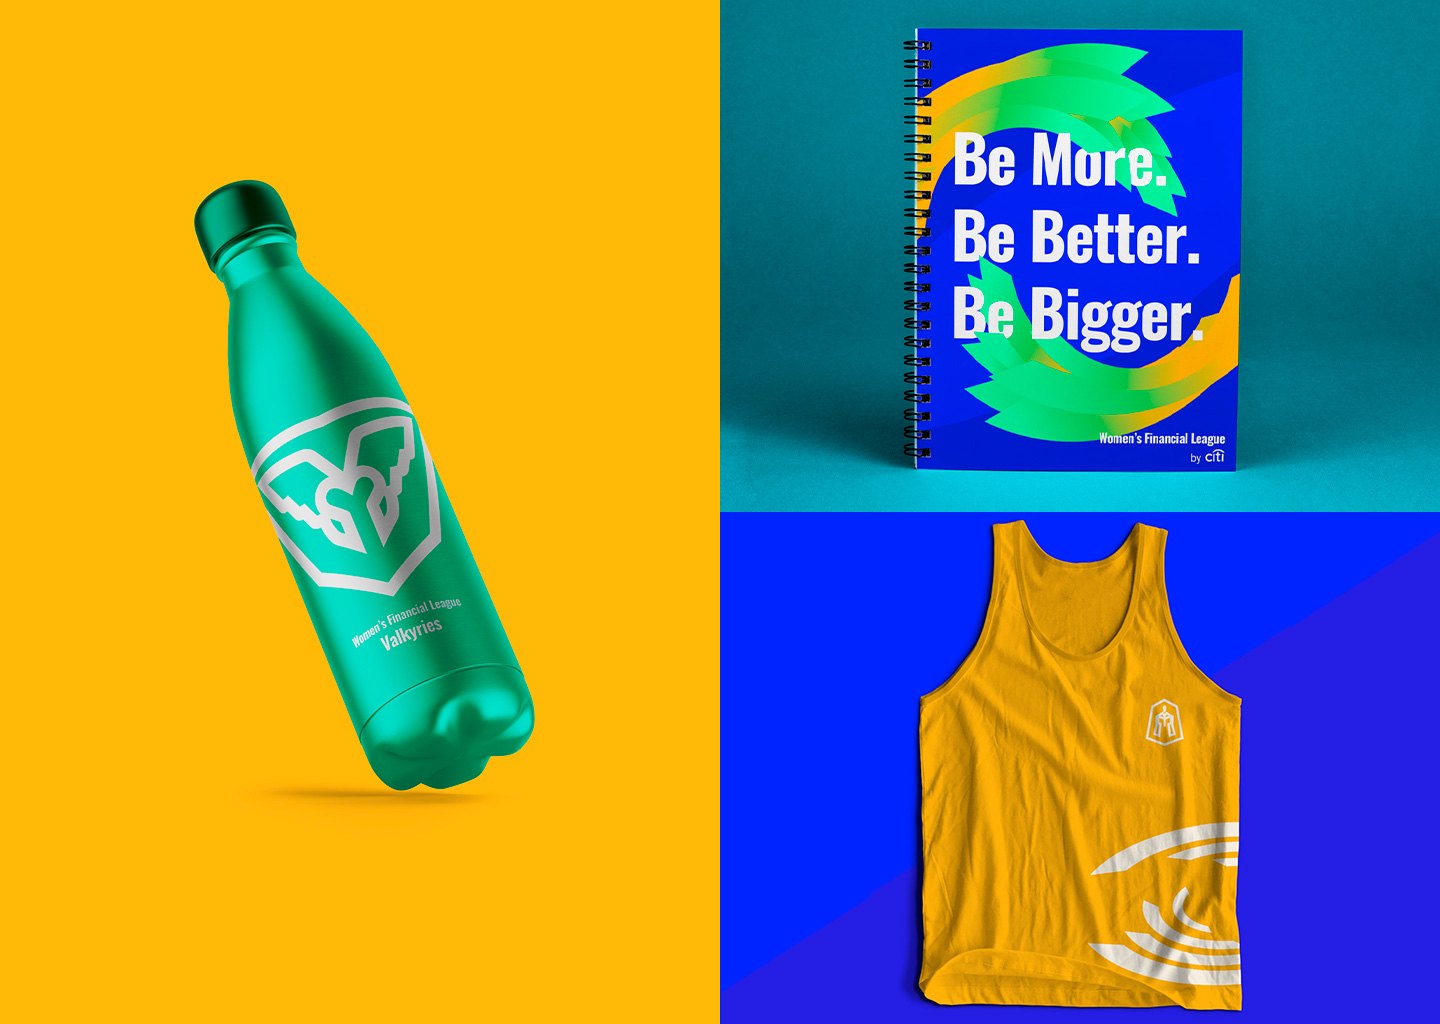 Three prizes that can be won. One is a teal reusable water bottle, another is an orange tank top and the third is a planner. All three branded with the leagues energy swirls and colors.